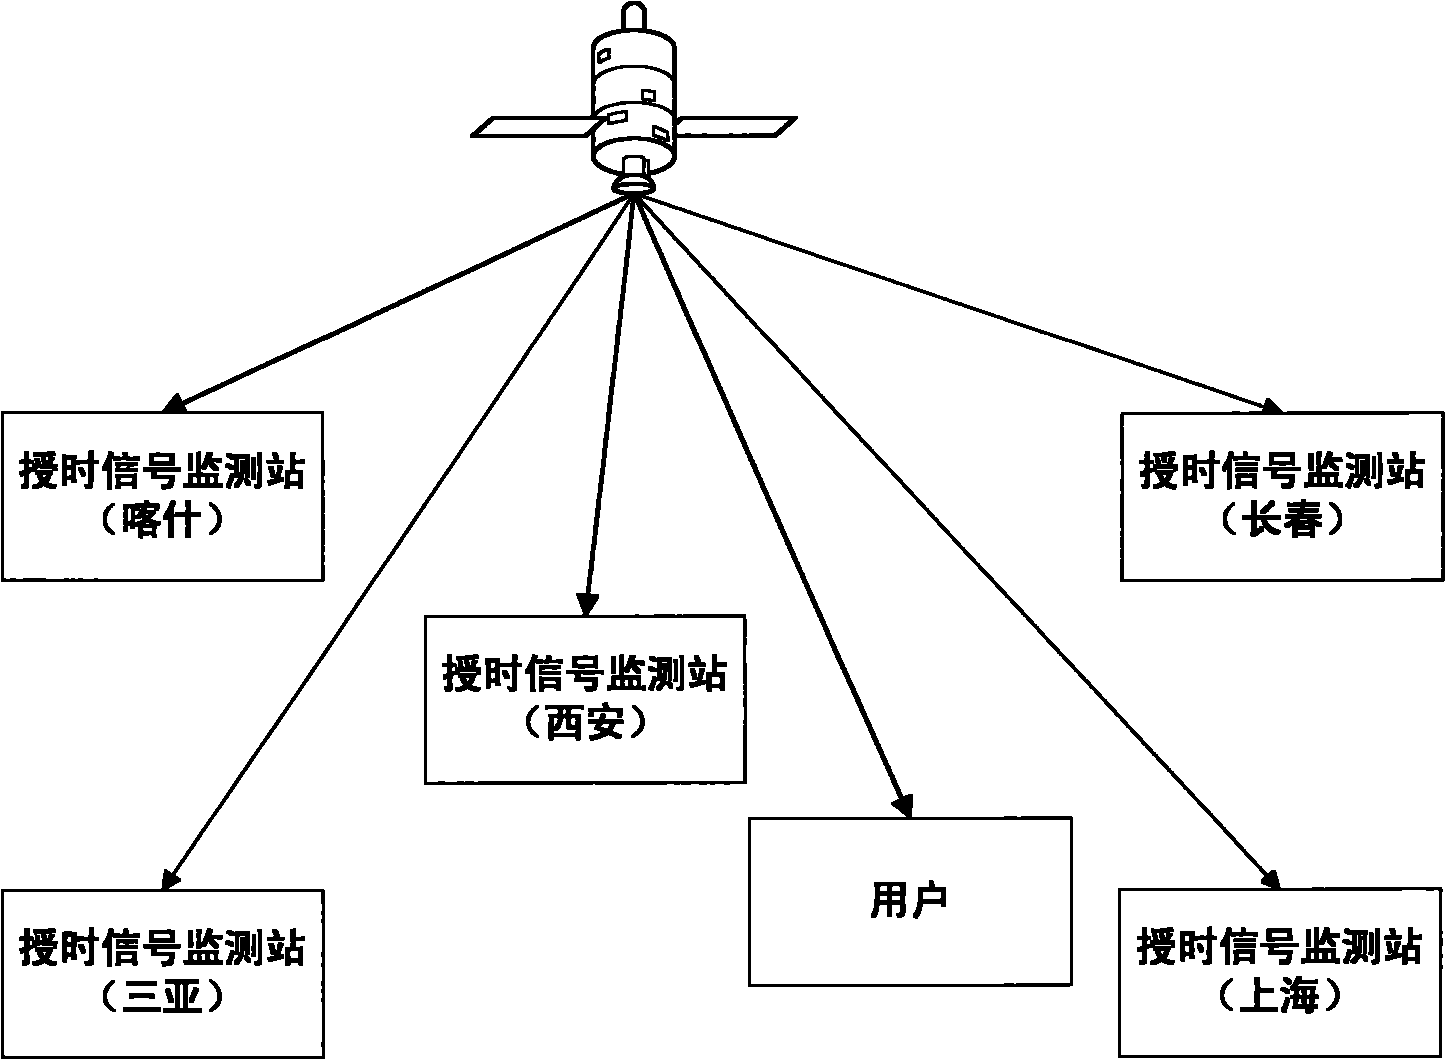 Common view principle-based unilateral time transmission method